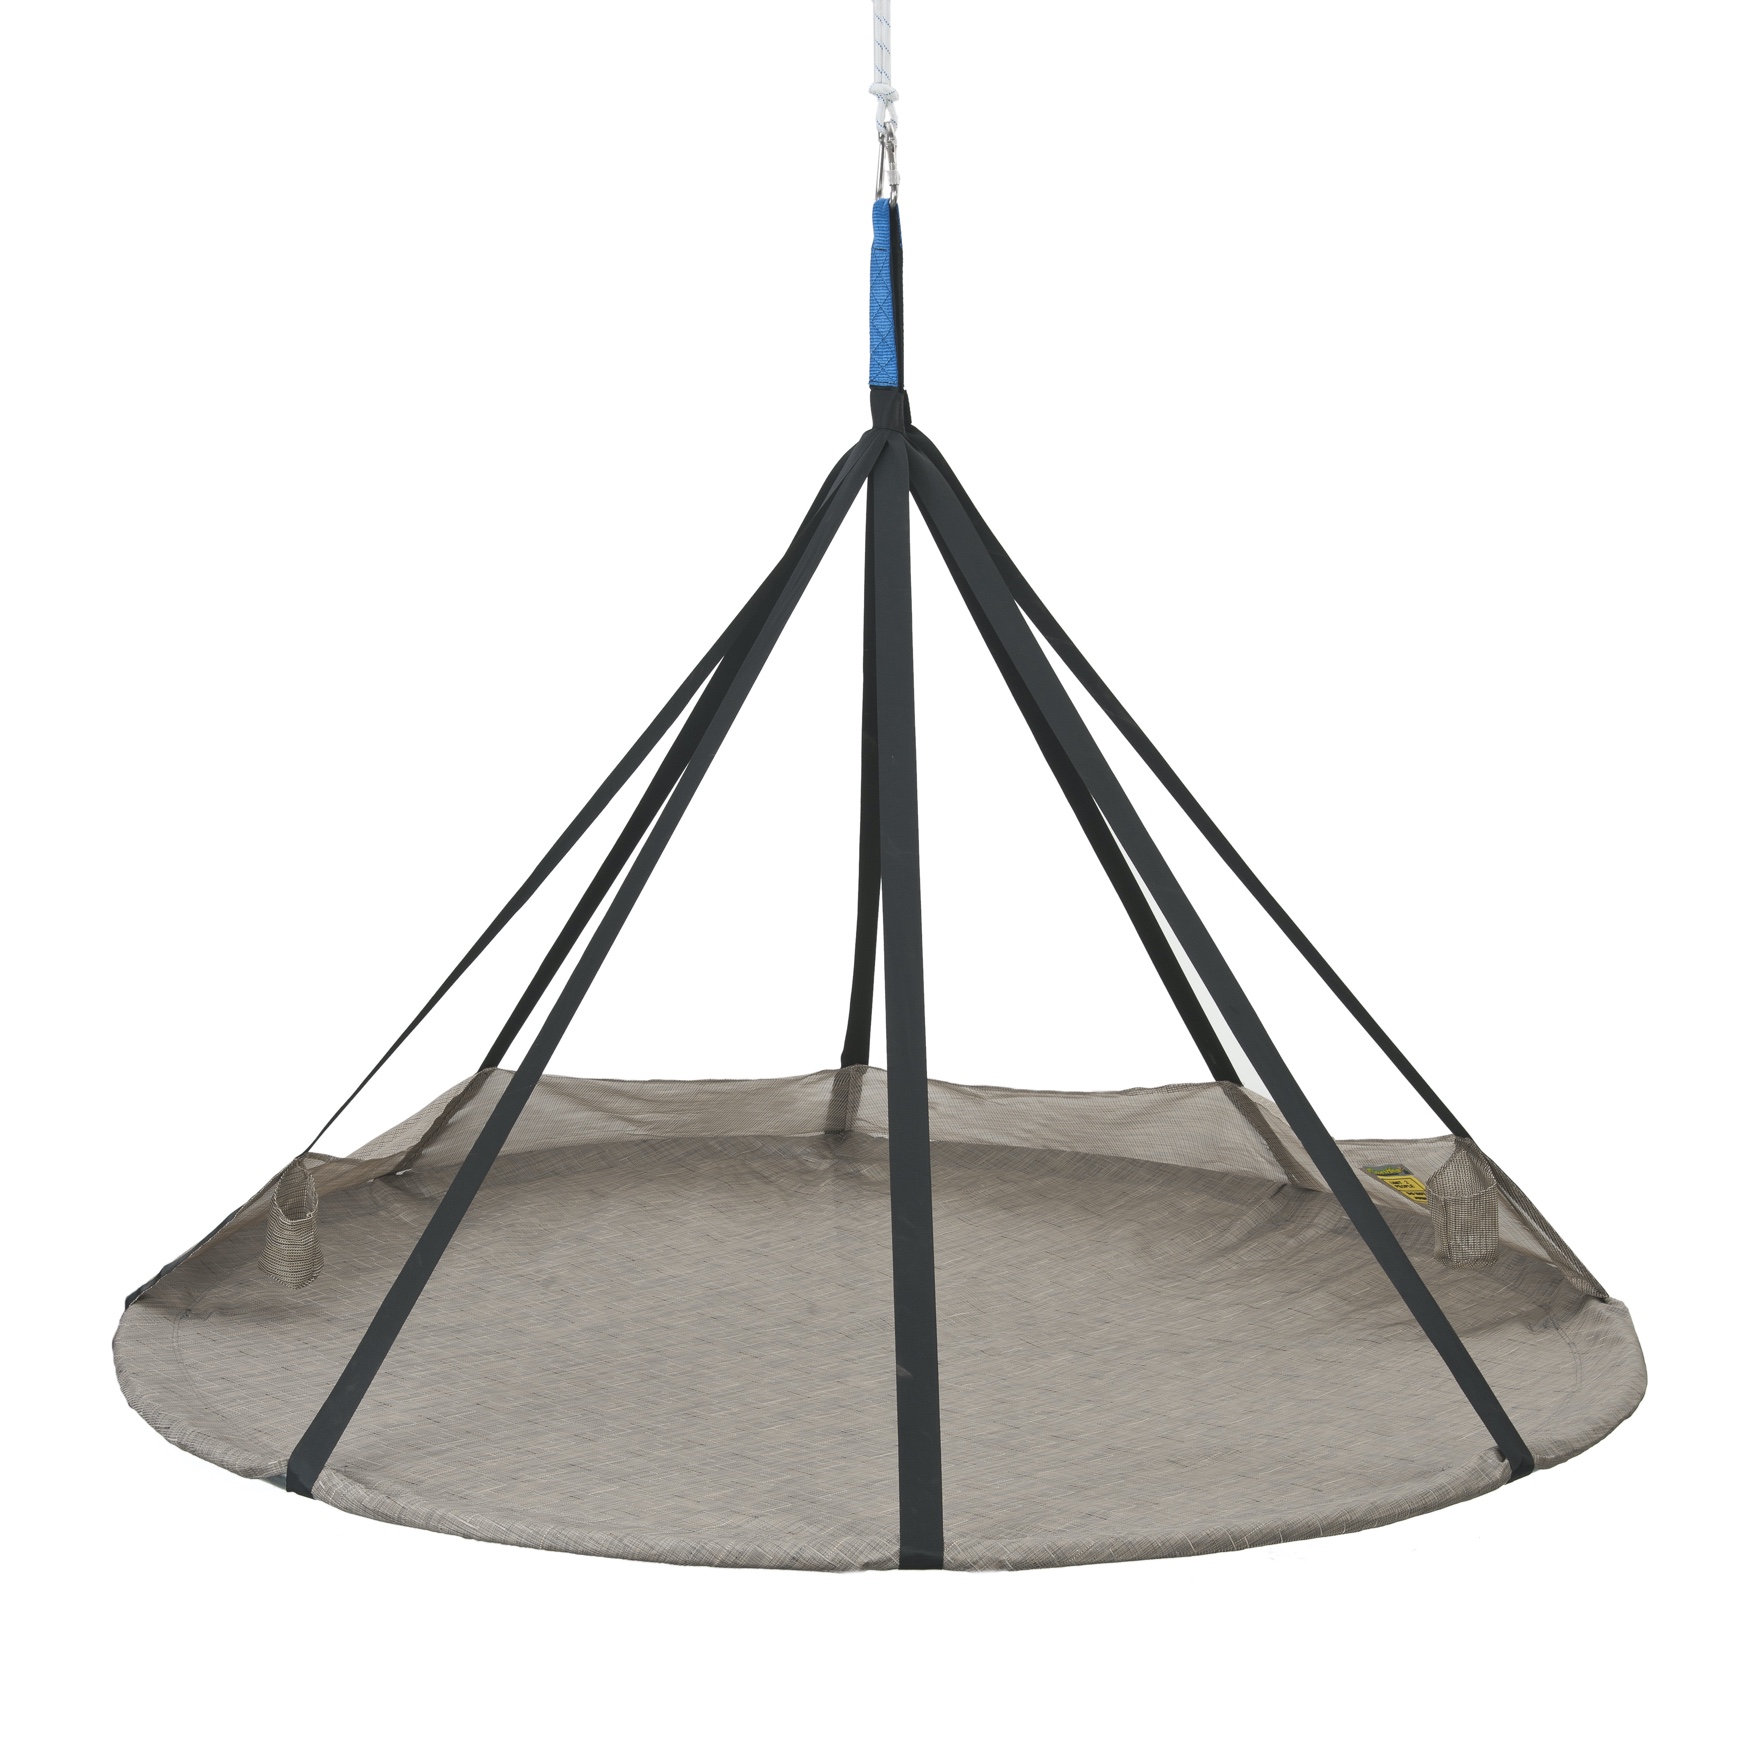 7ft dia Hammock Flying Saucer Hanging Chair, GRAY